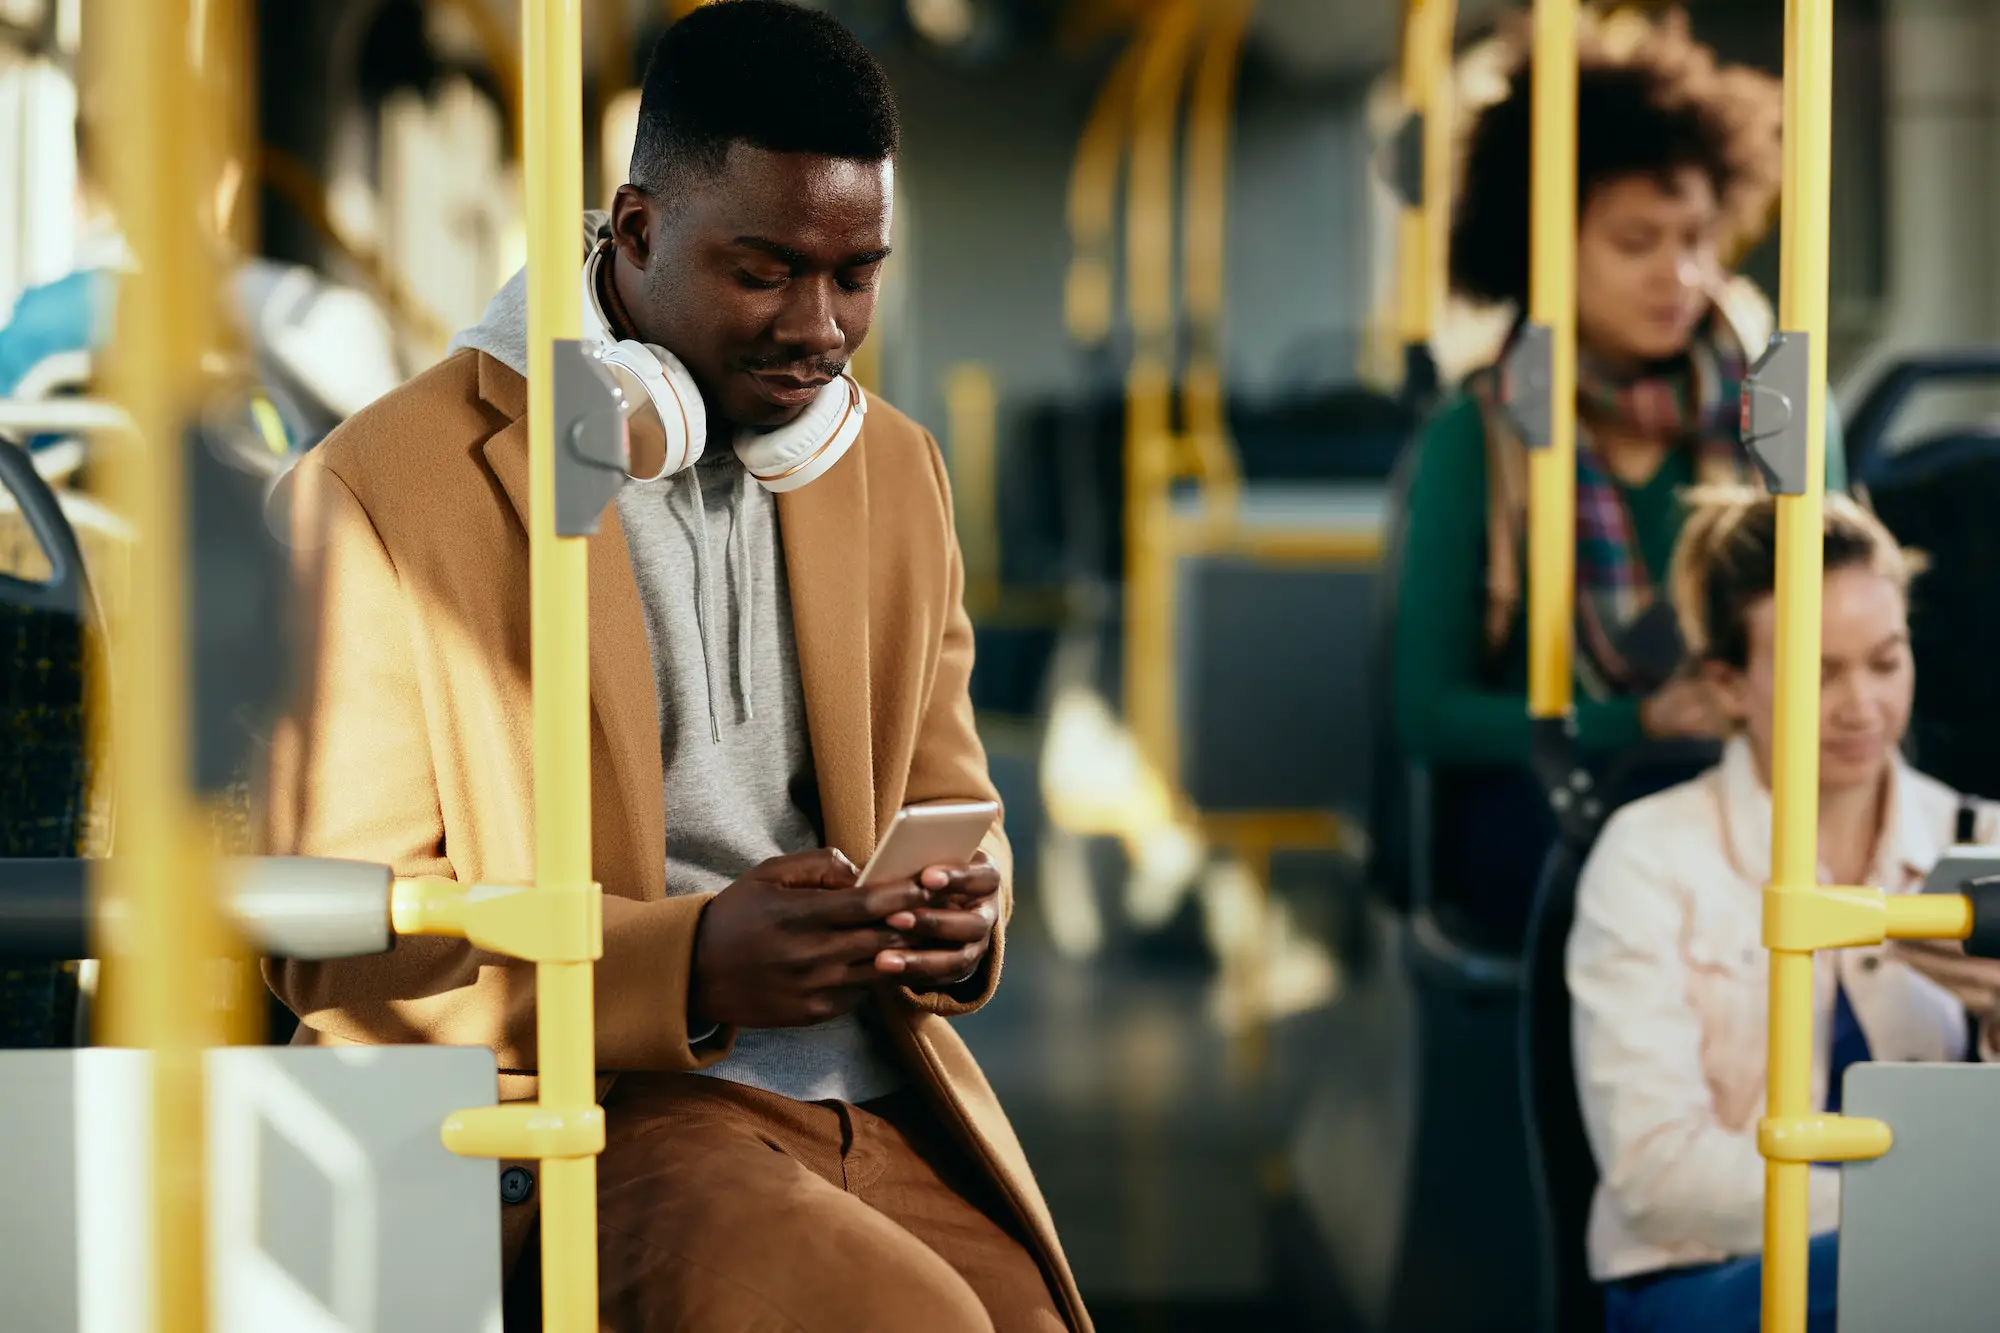 African American man text messaging on cell phone while commuting by public transport.